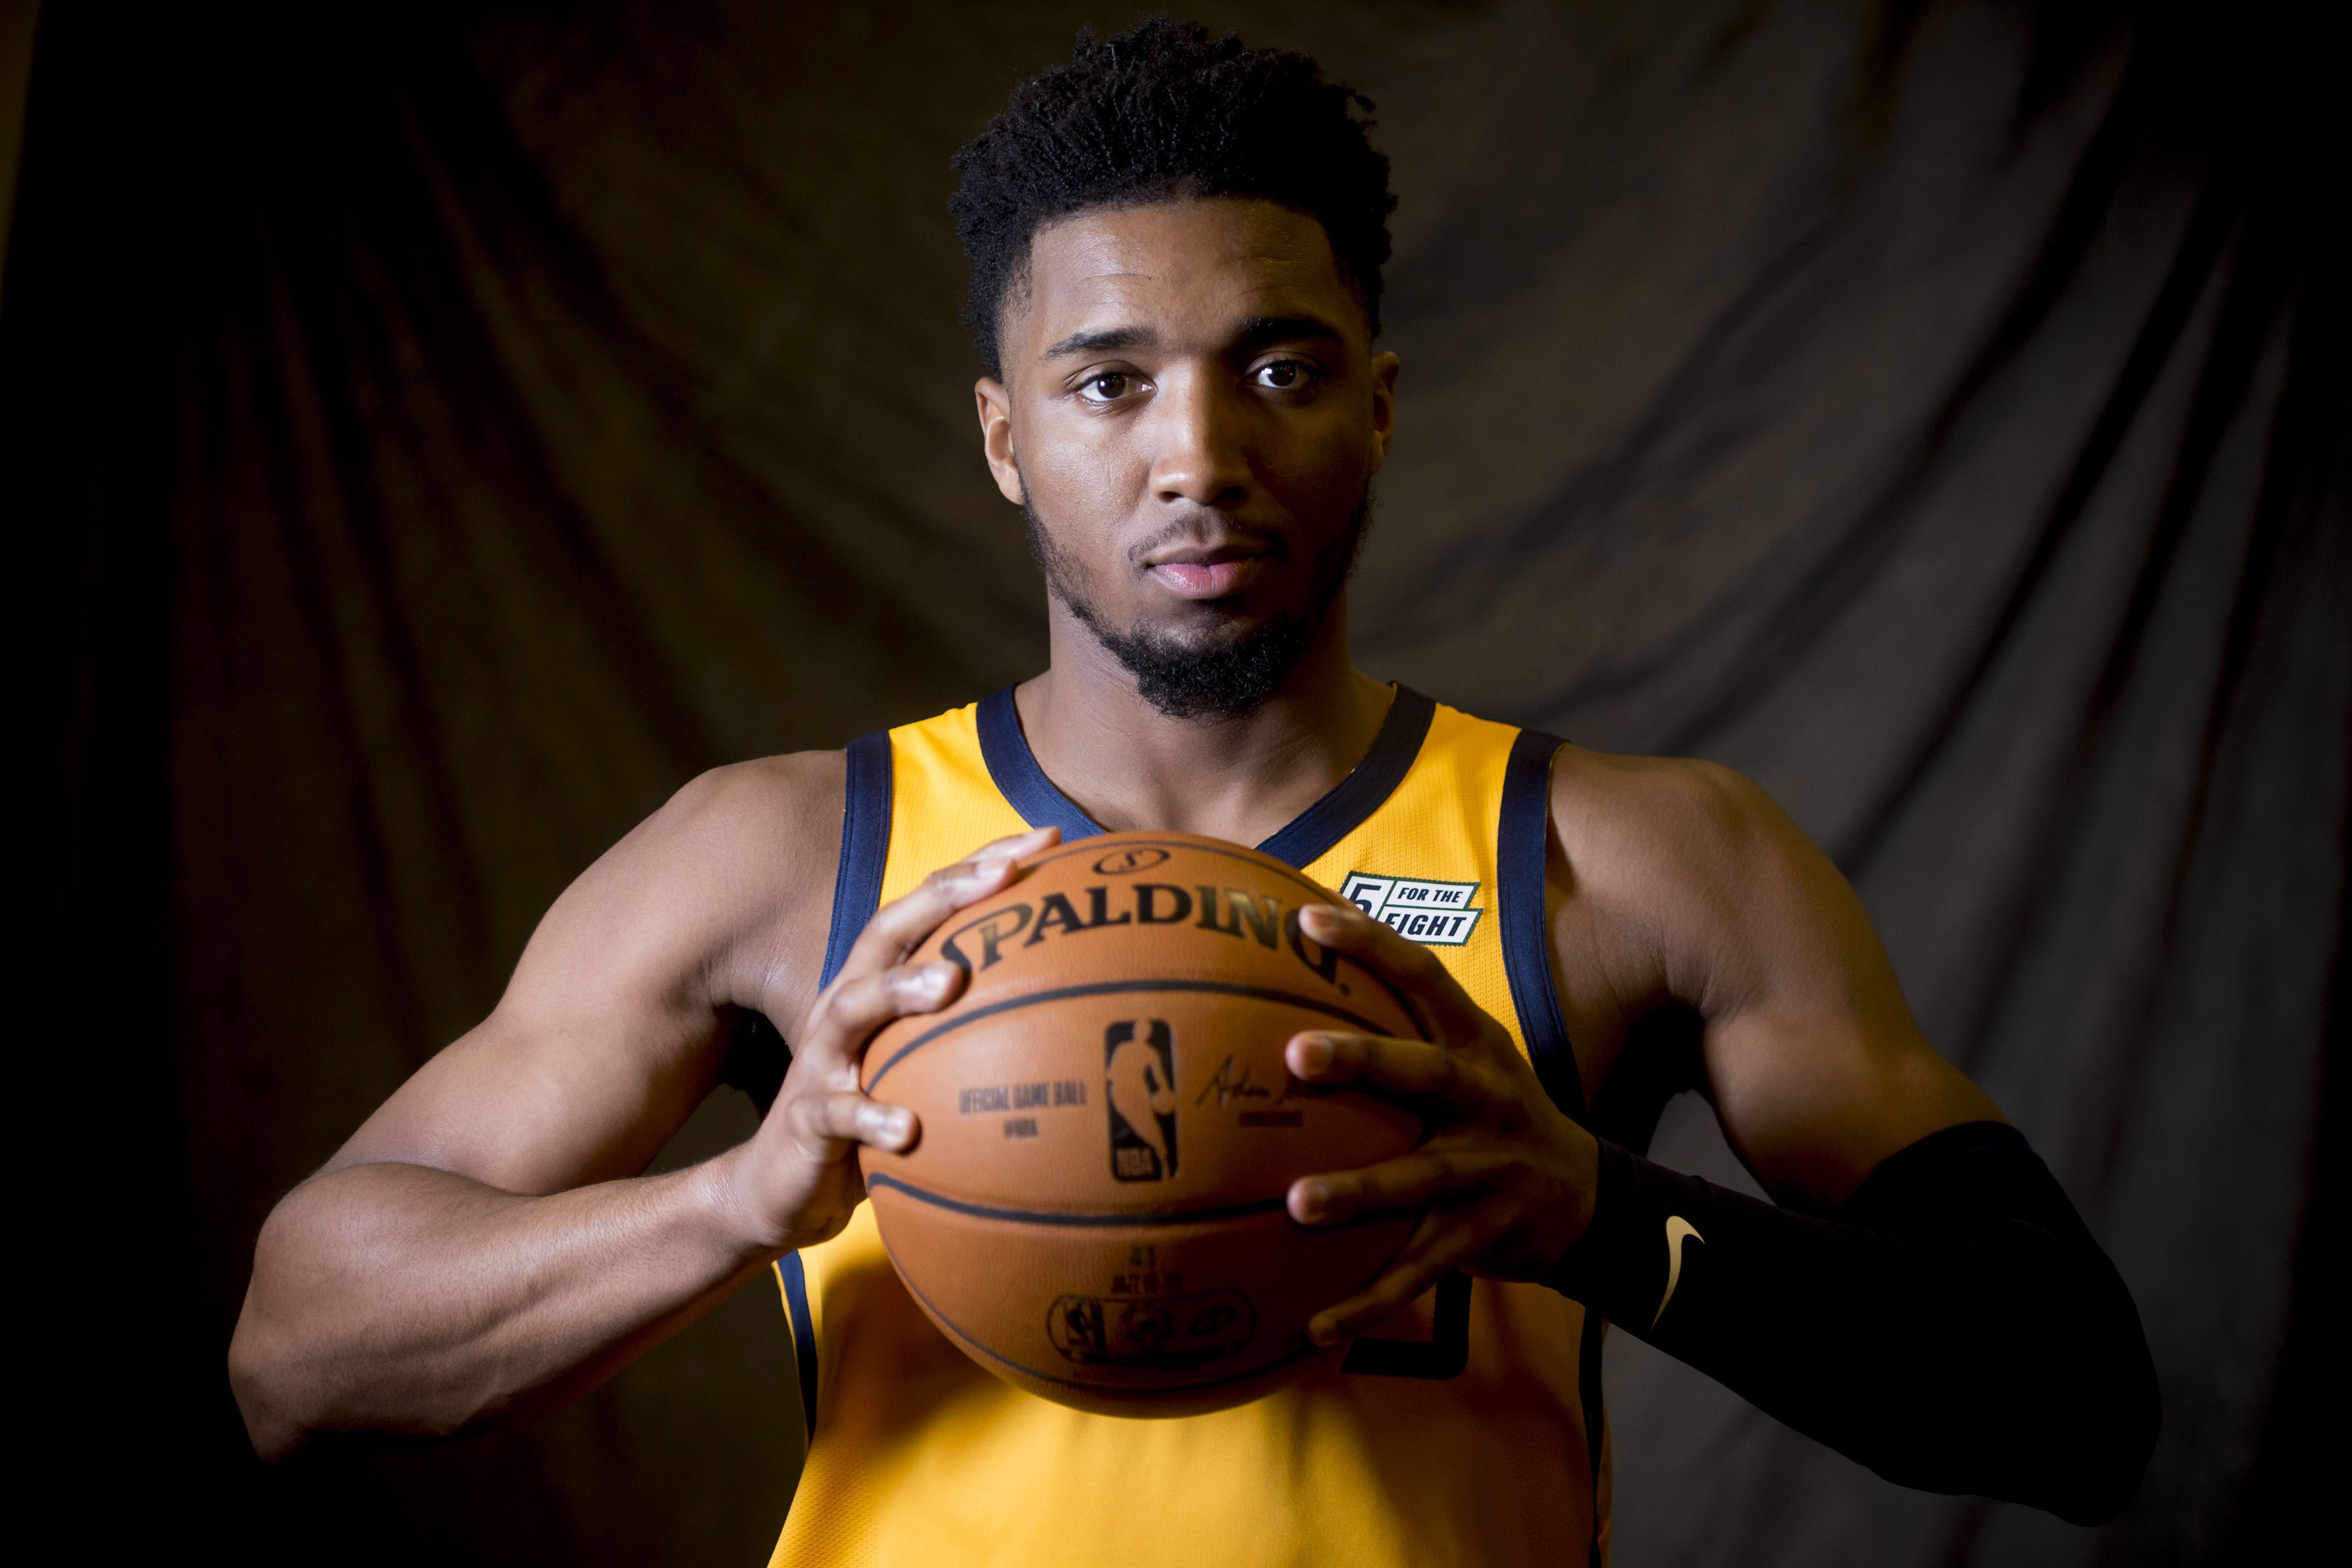 Donovan Mitchell named to Team USA camp roster - SLC Dunk